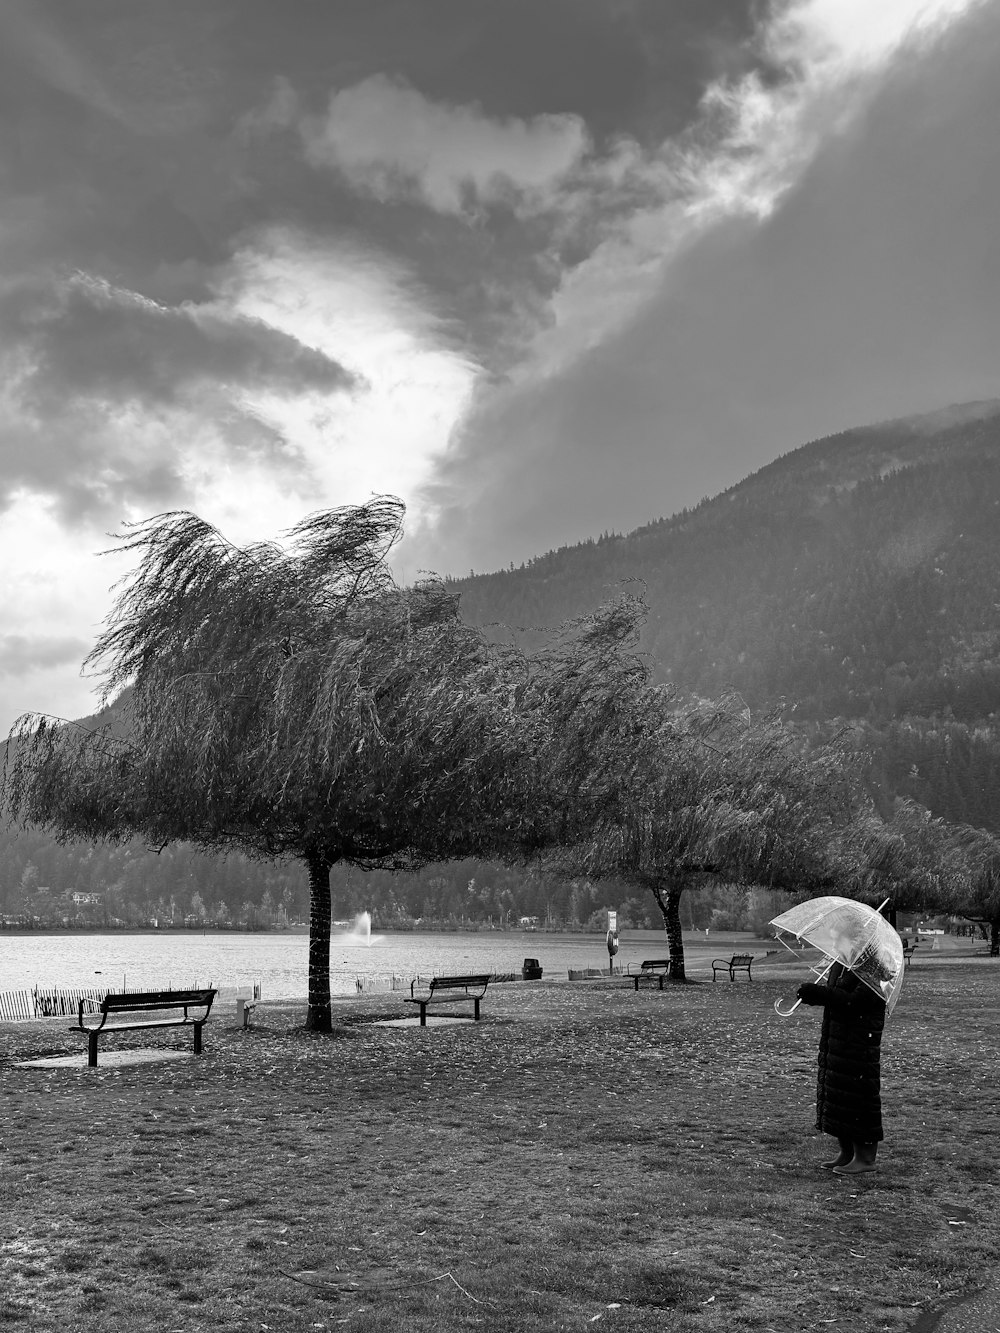 a person standing under a tree with an umbrella